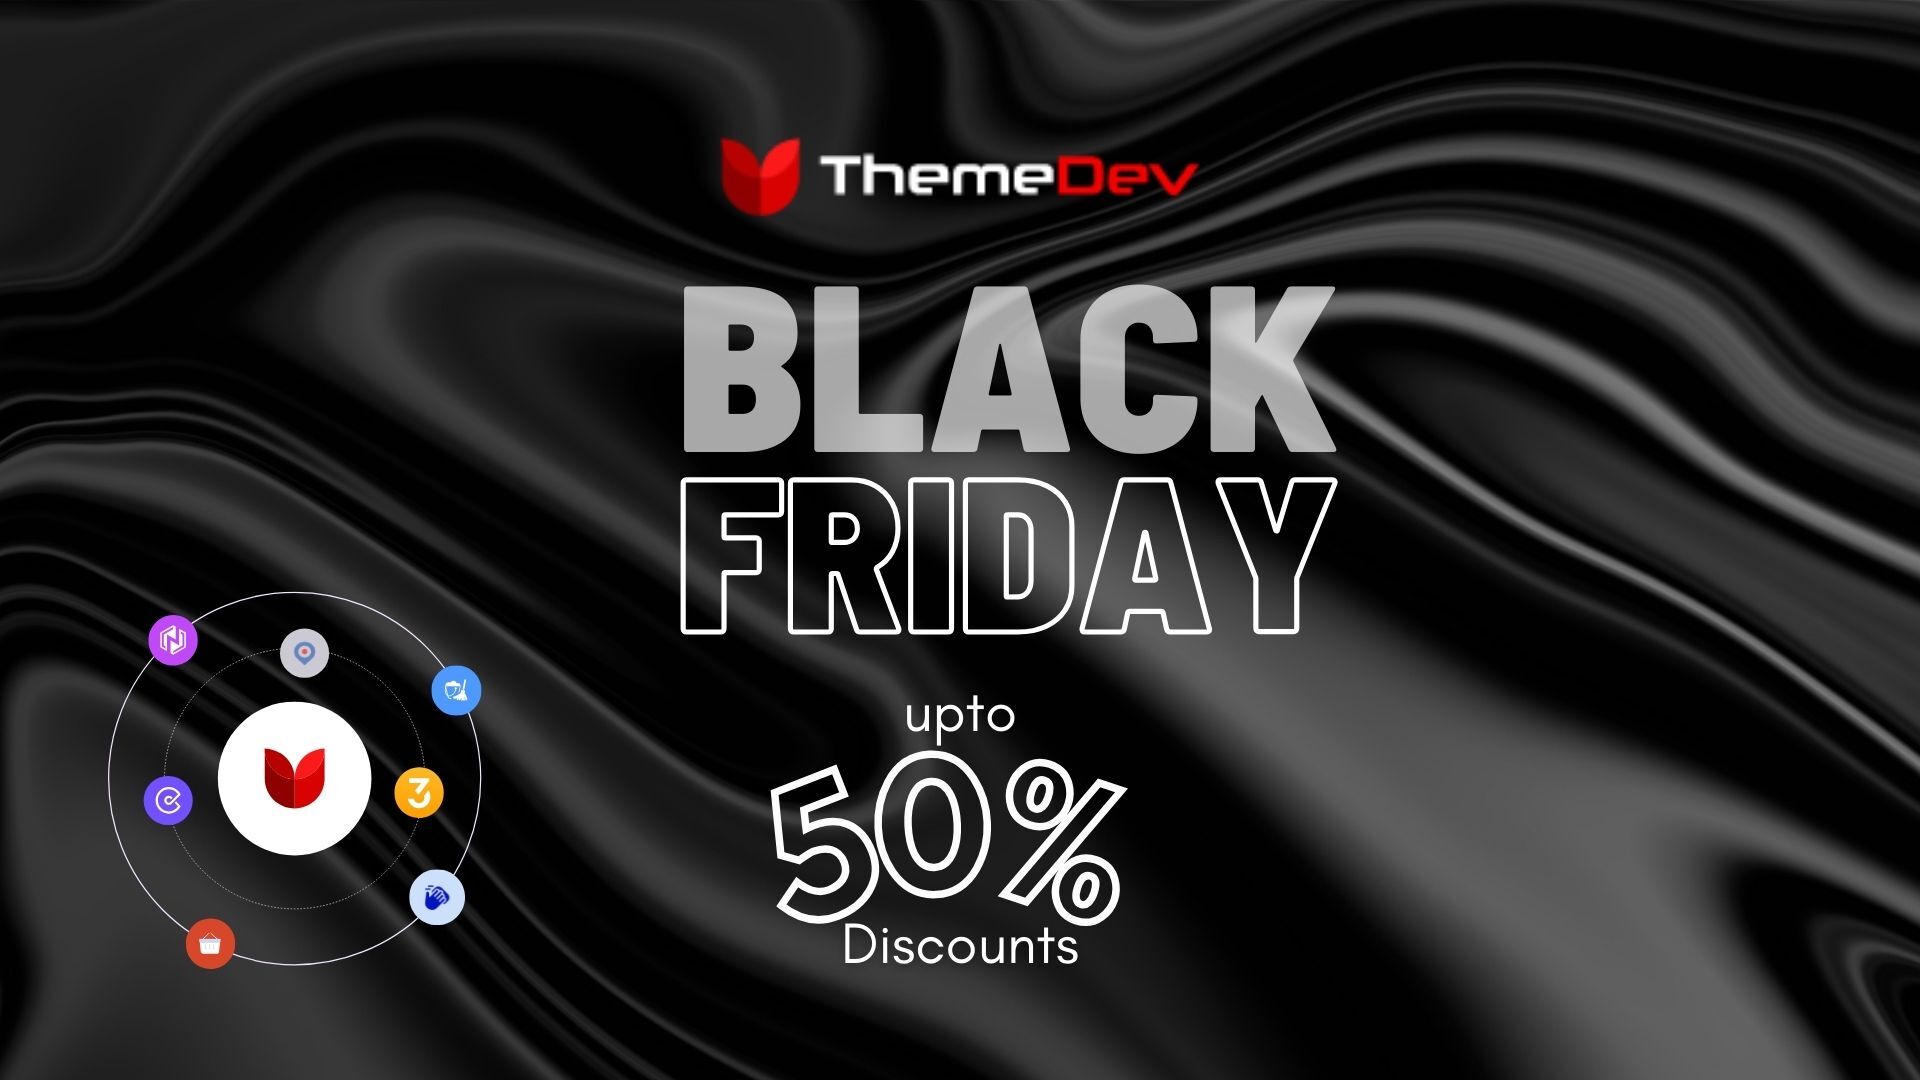 Black Friday deals from ThemeDev.